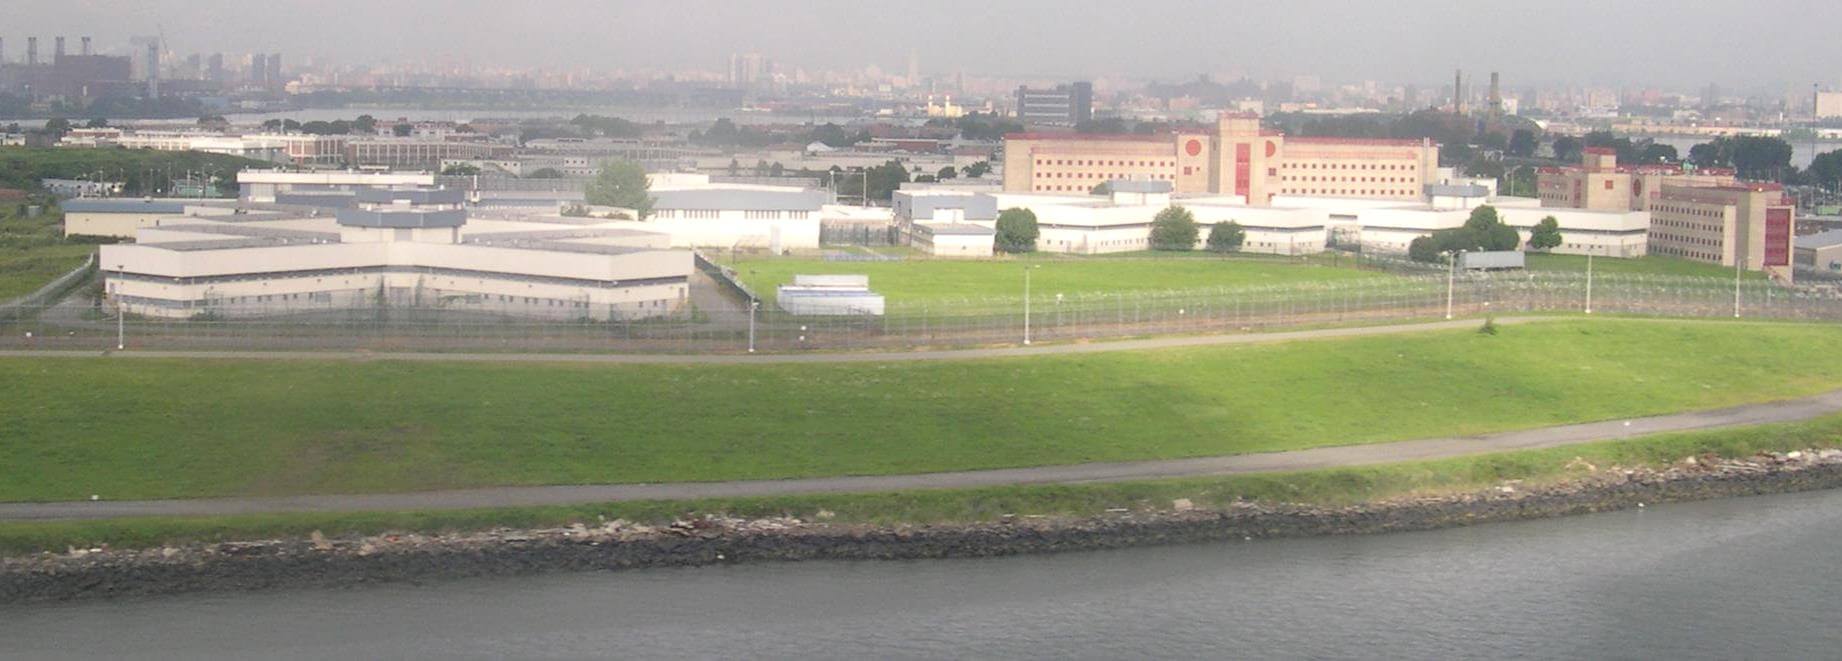 The Rikers Island and jail complex in 2004.